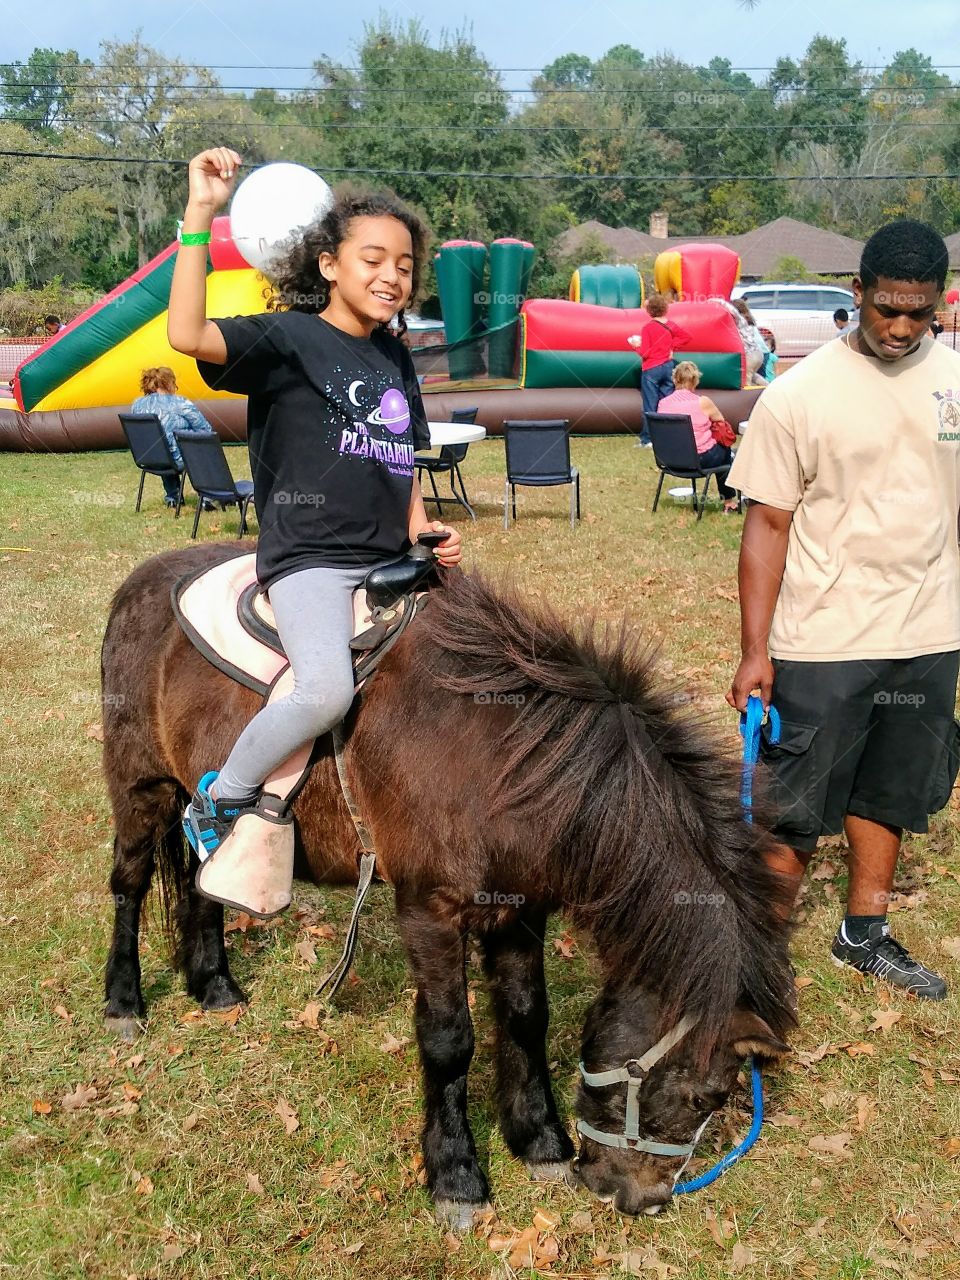 Child riding a pony named  Chocolate.